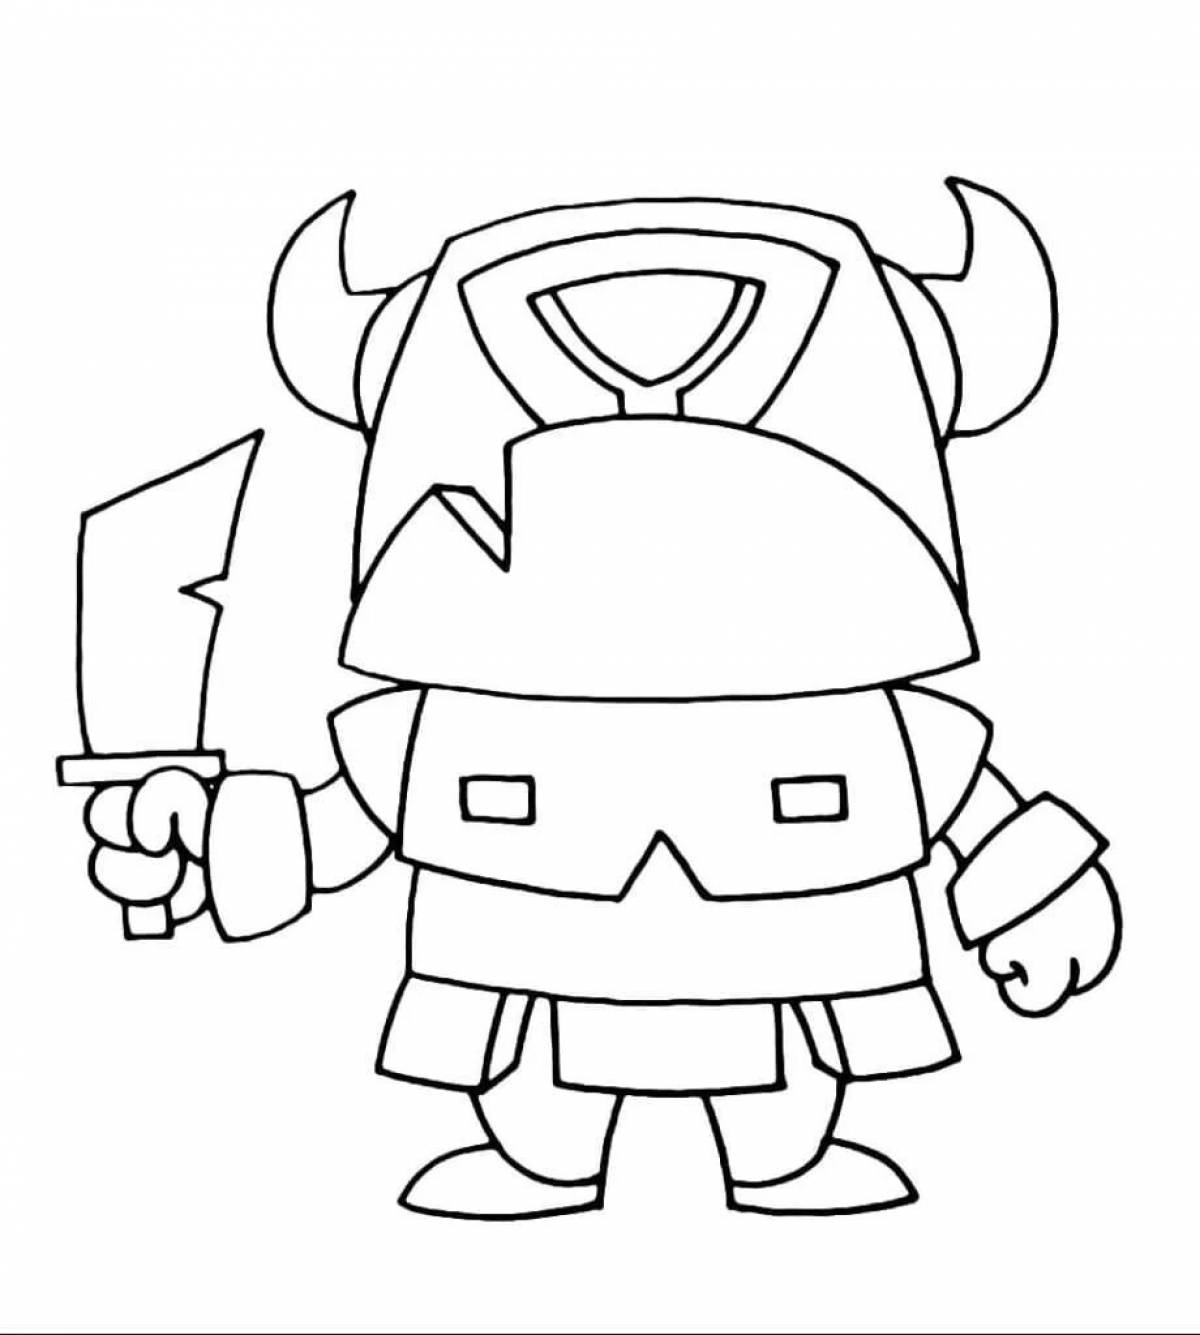 Serene clash royale arena coloring page